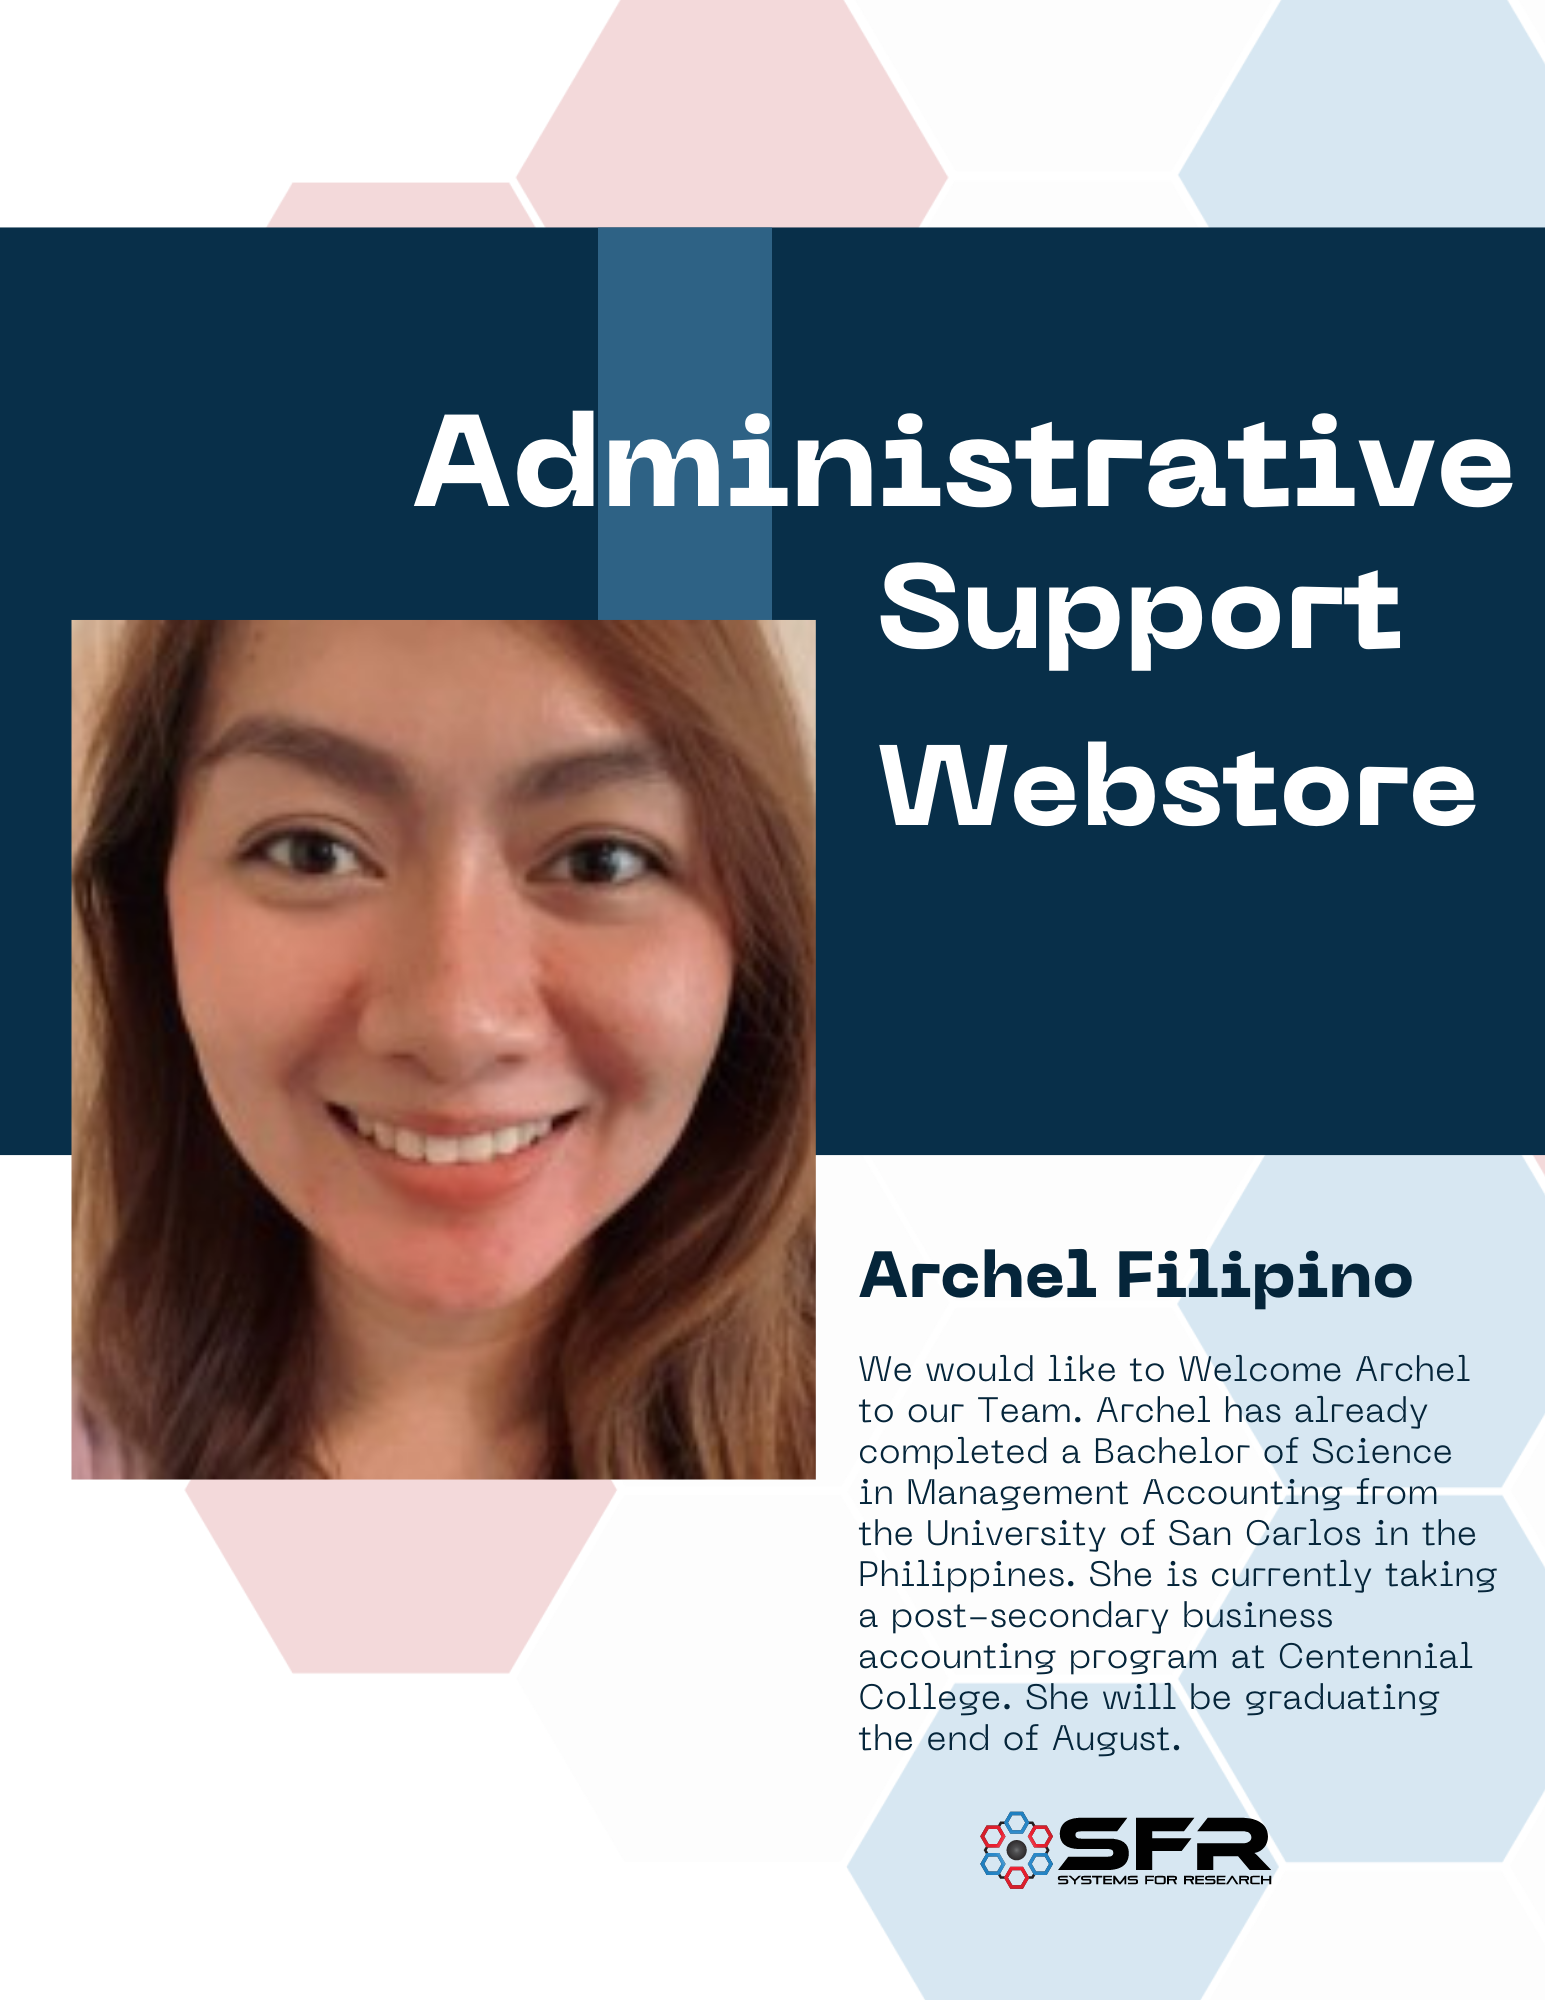 WELCOME ARCHEL FILIPINO TO OUR OPERATIONS TEAM!